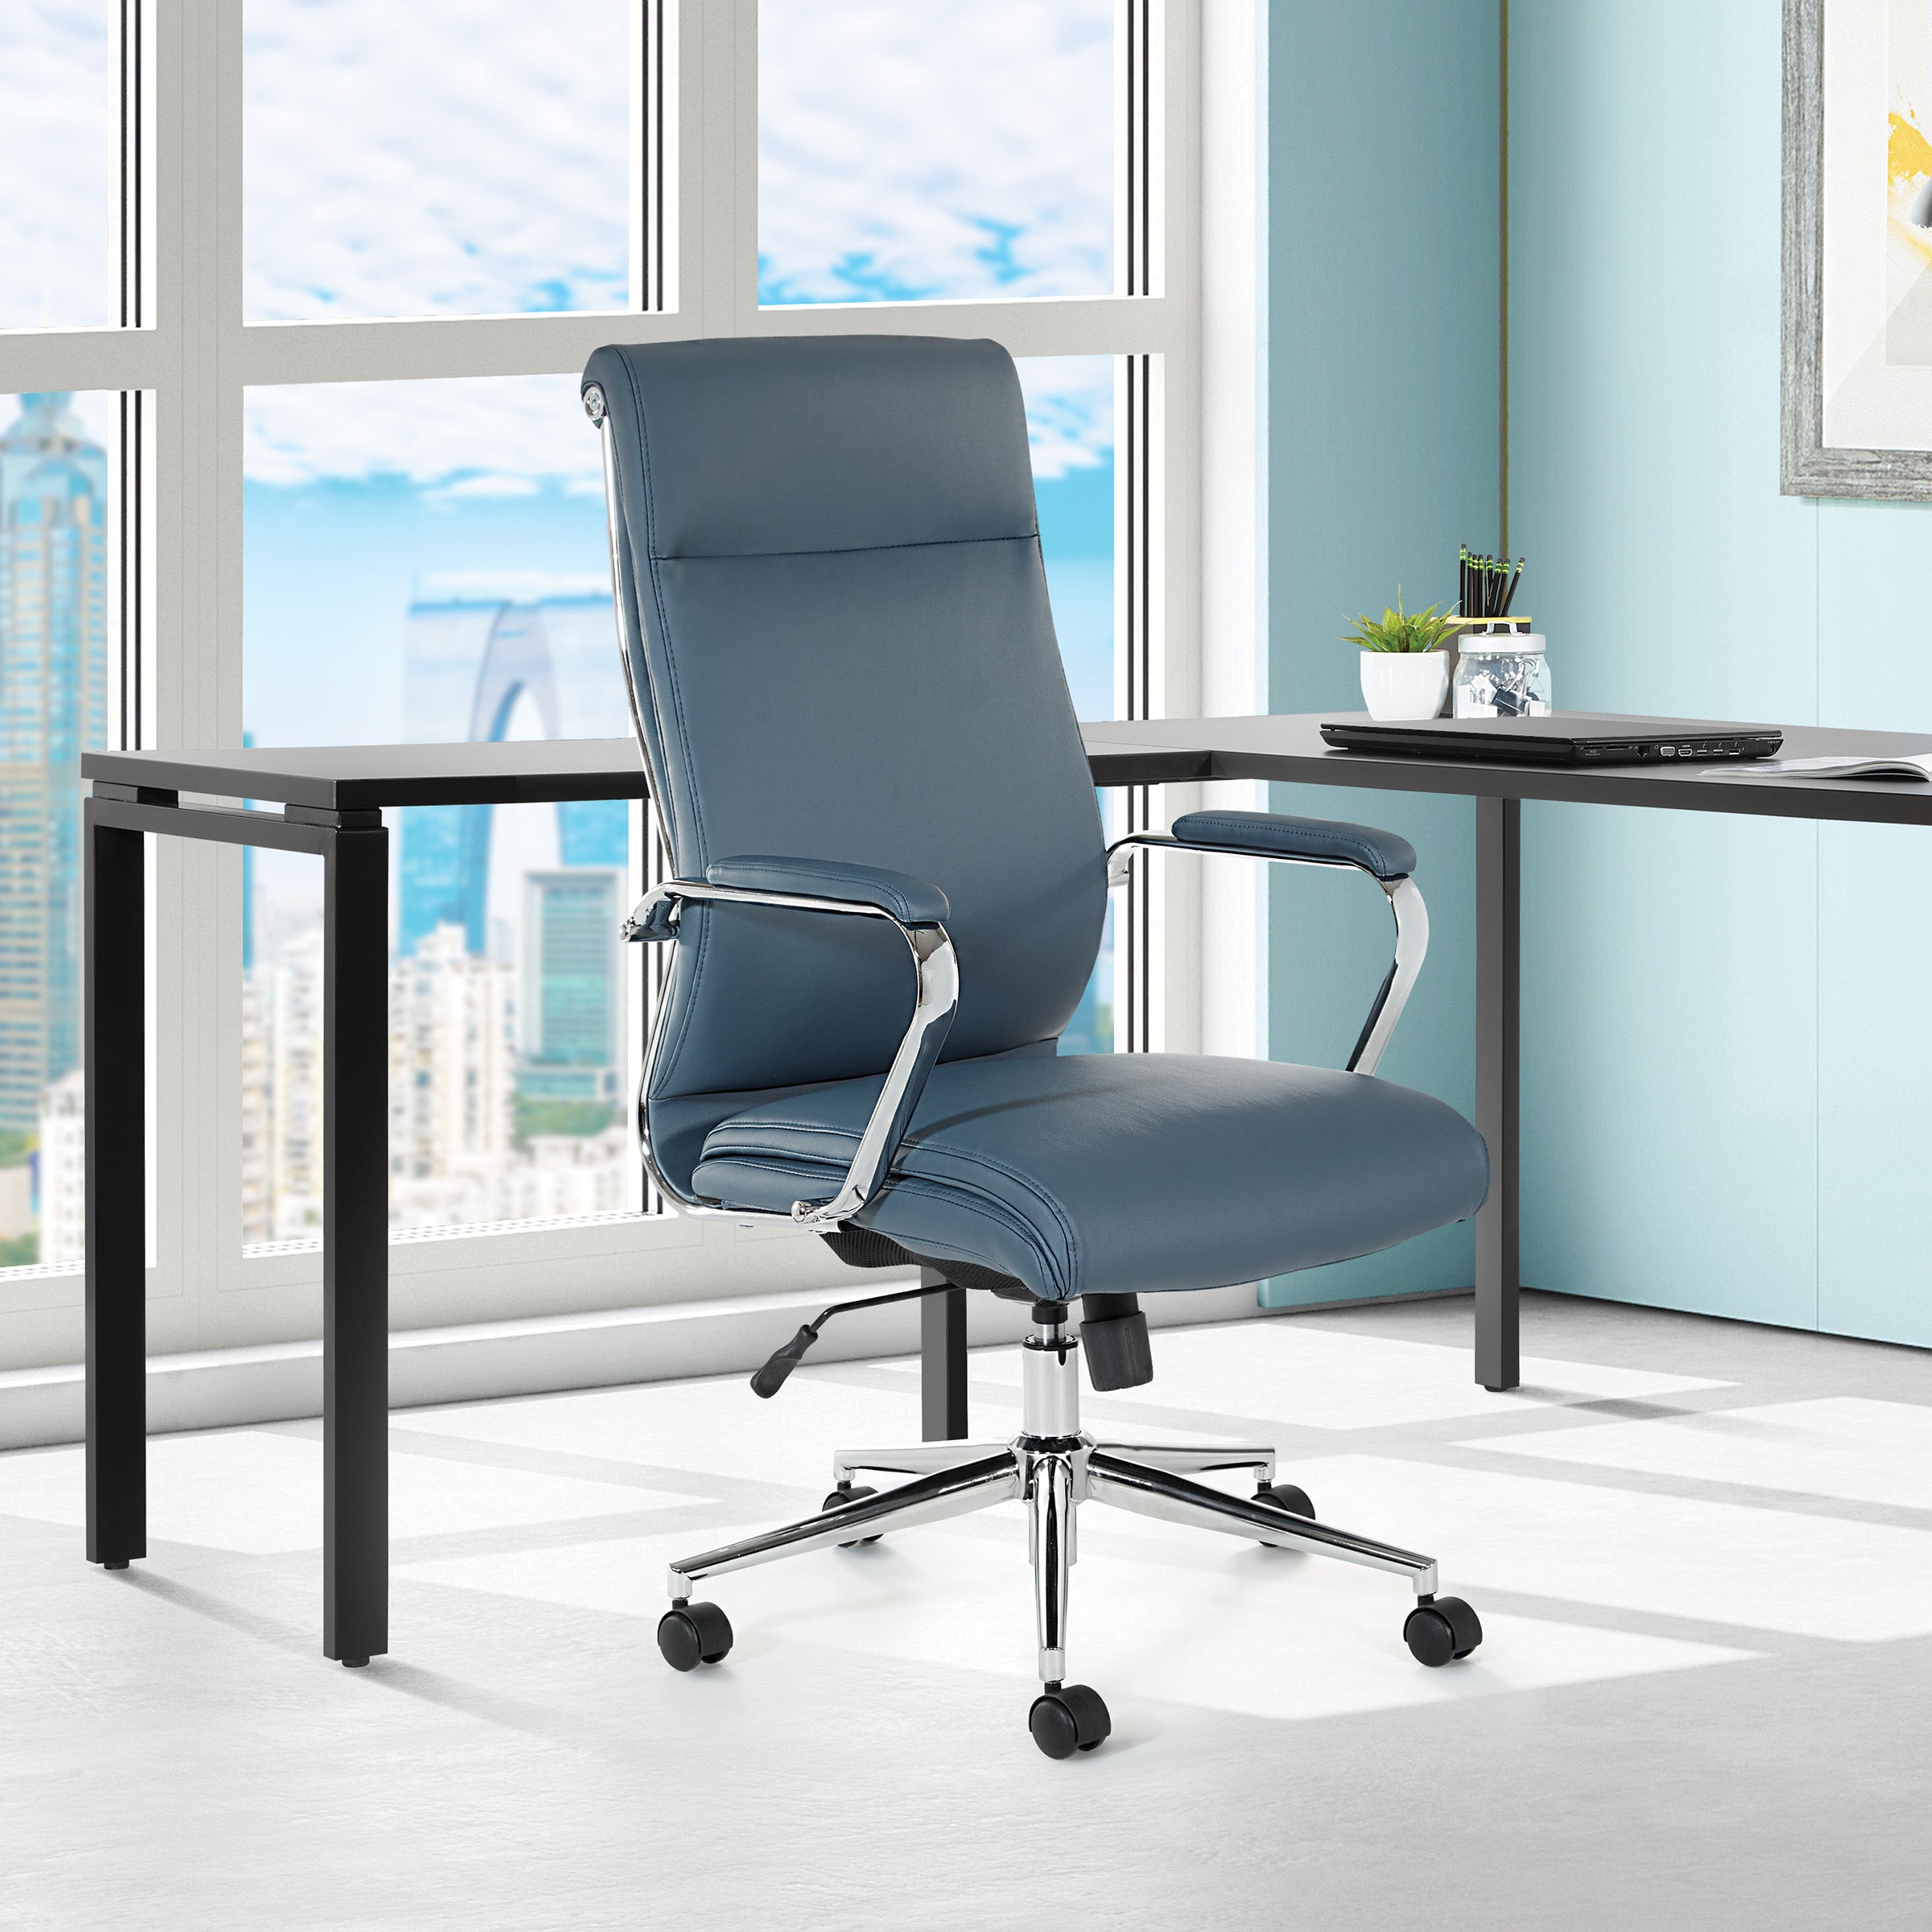 920350C - High Back Manager's Chair with Padded Chrome Arms by OSP